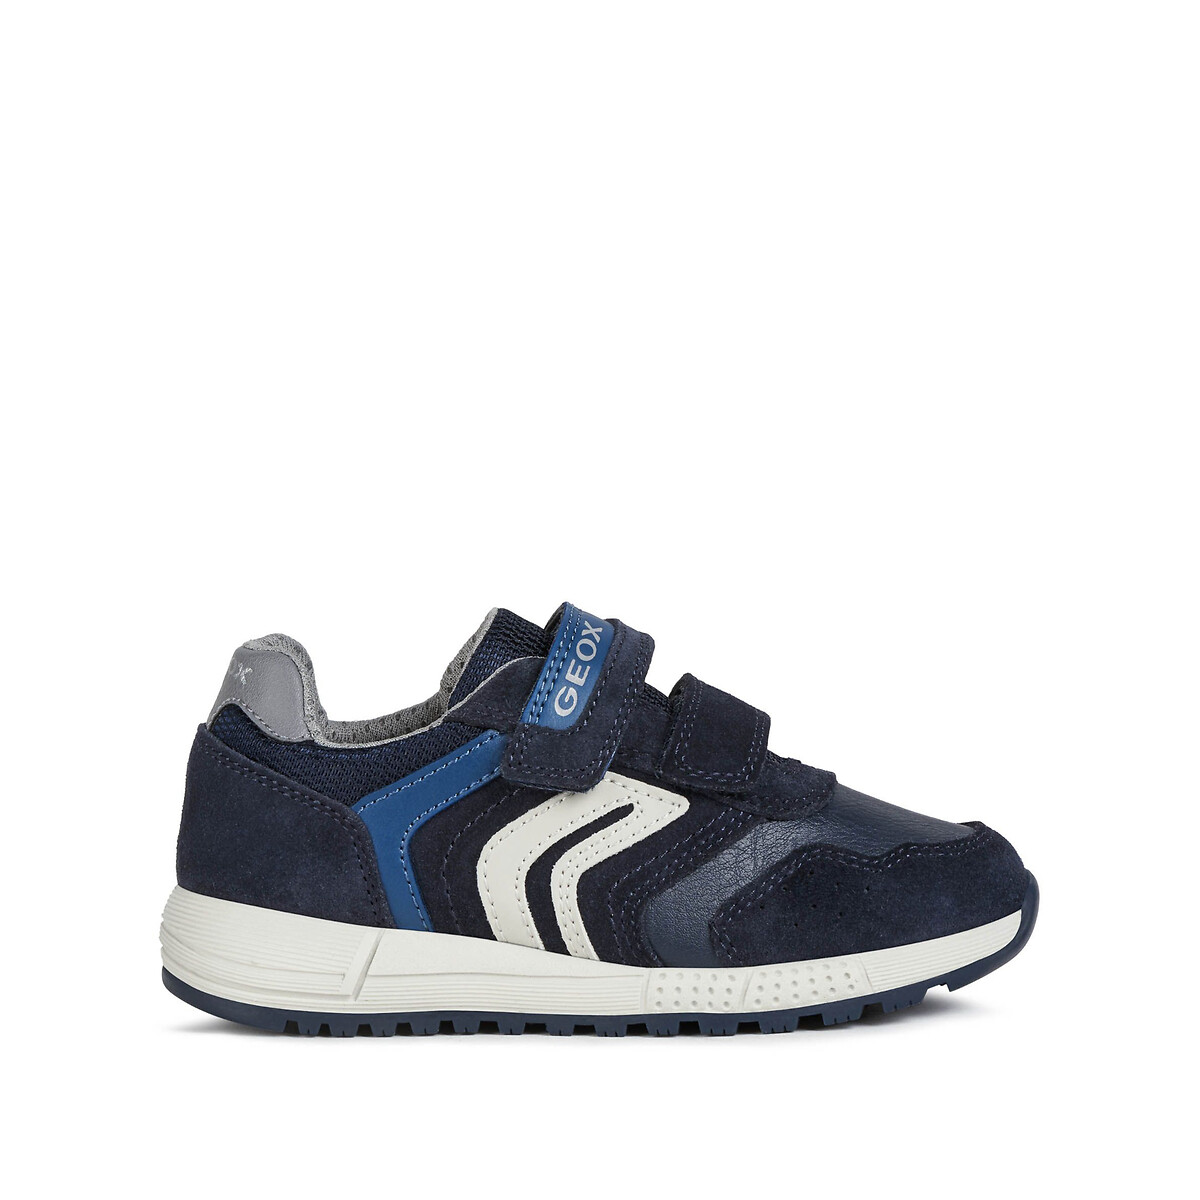 Image of Kids Alben Breathable Trainers in Leather with Touch 'n' Close Fastening